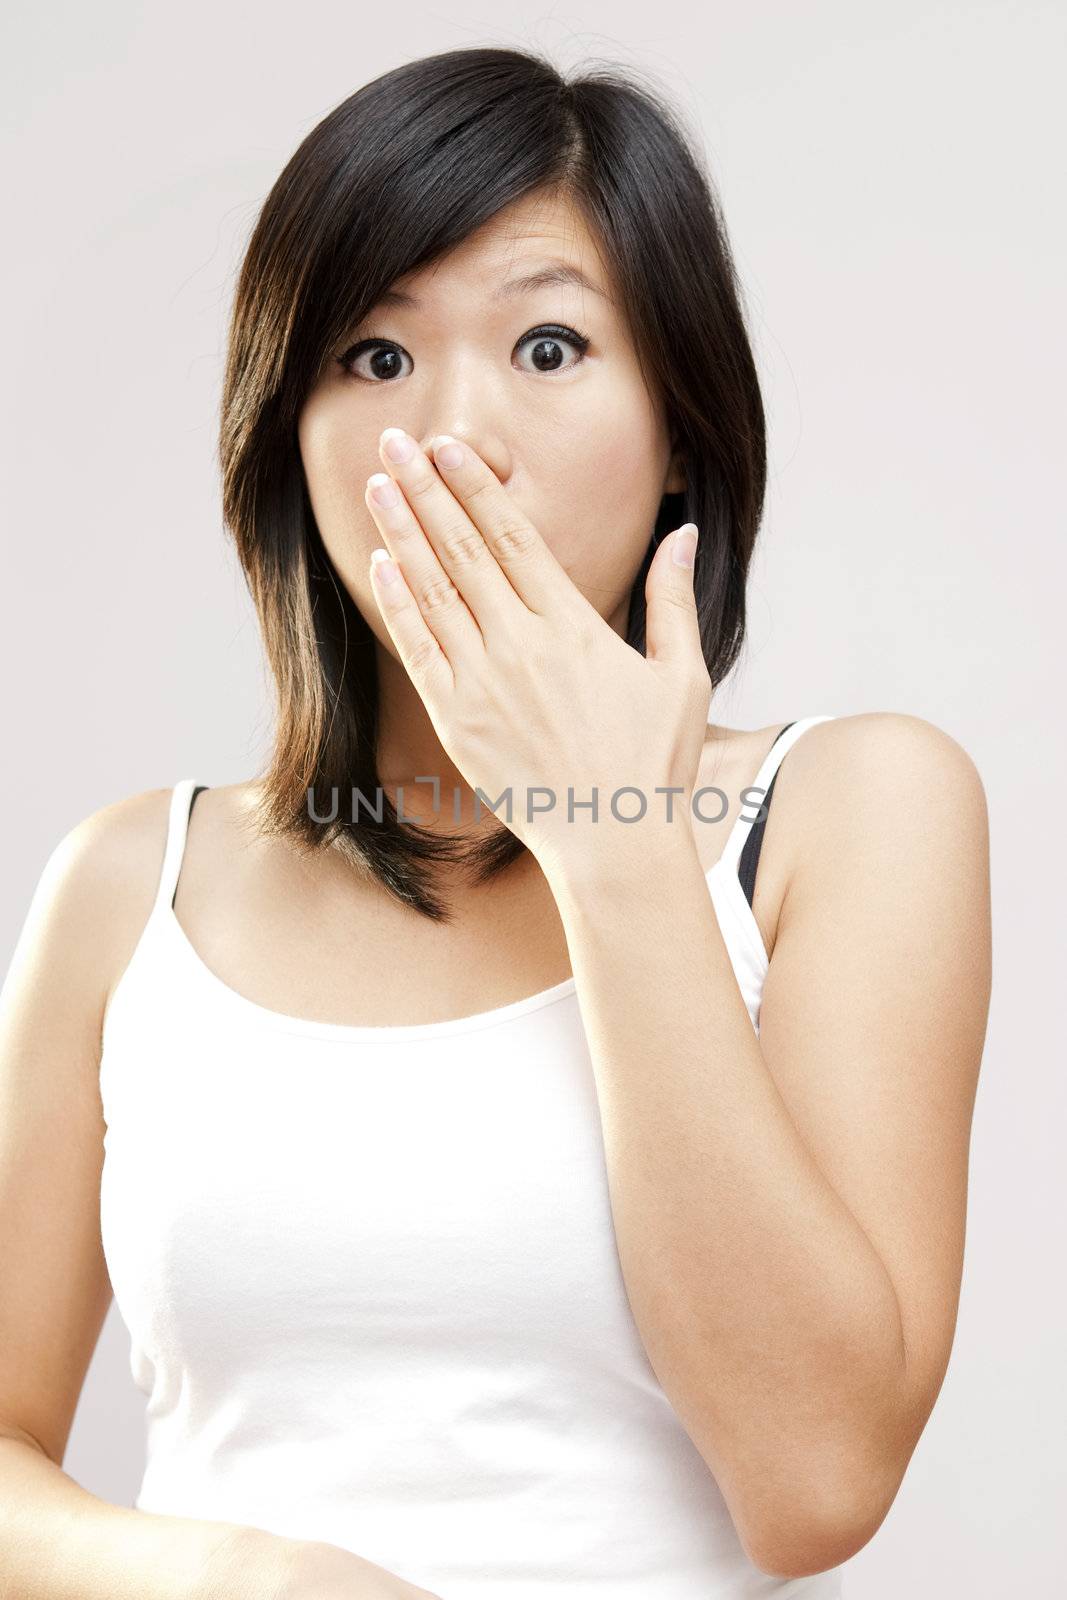 Shocked woman covering her mouth by hand.